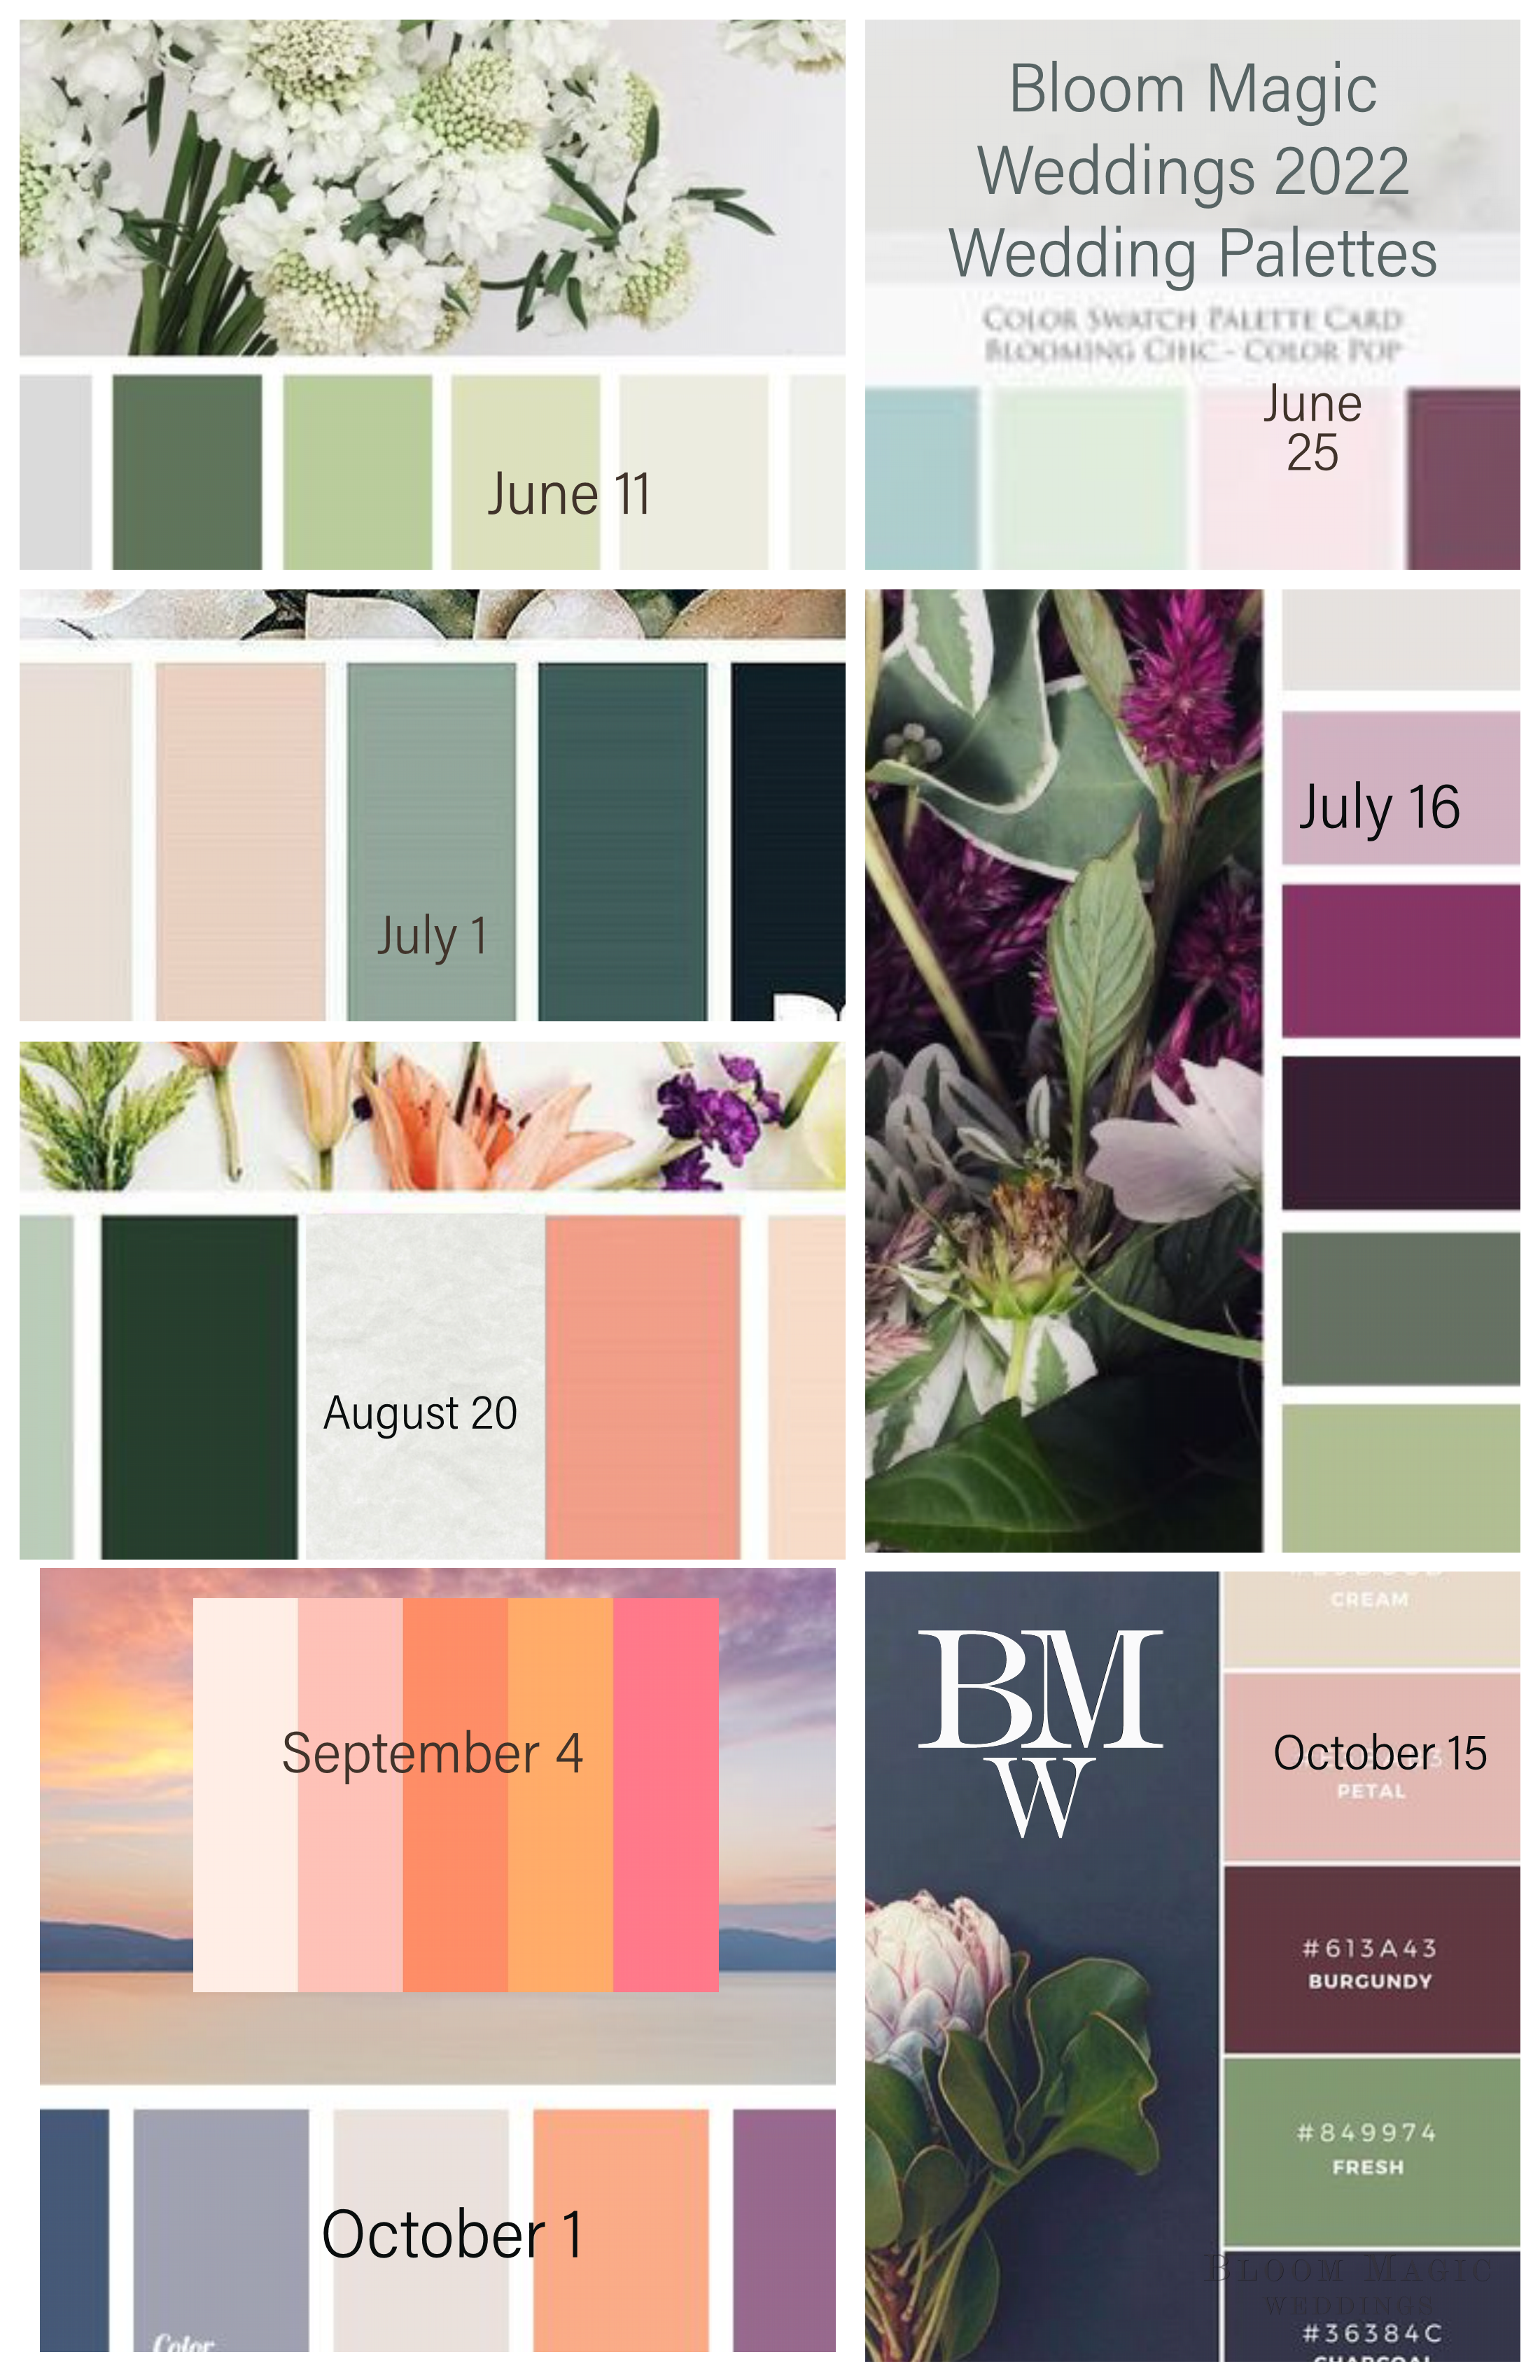 A Year in Colors: Charting Wedding Color Schemes - SlowFlowers Journal